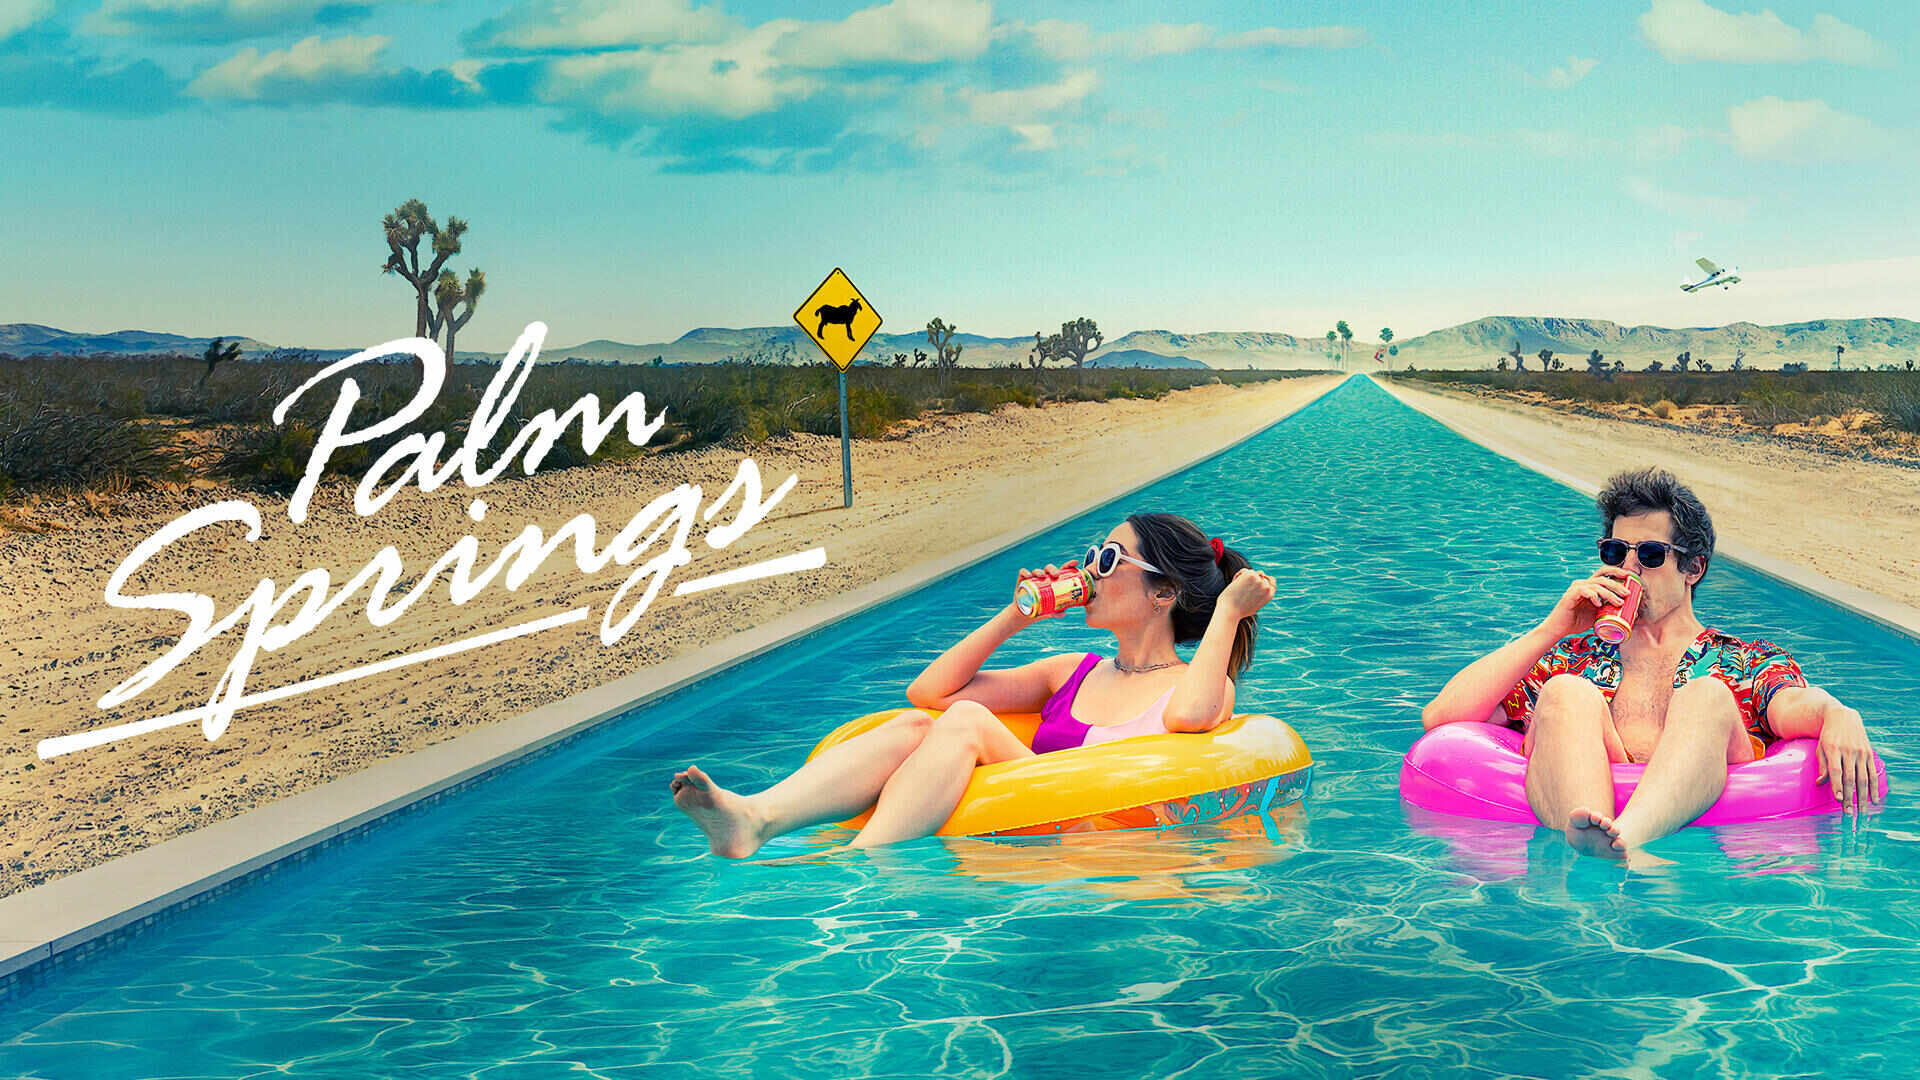 42-facts-about-the-movie-palm-springs